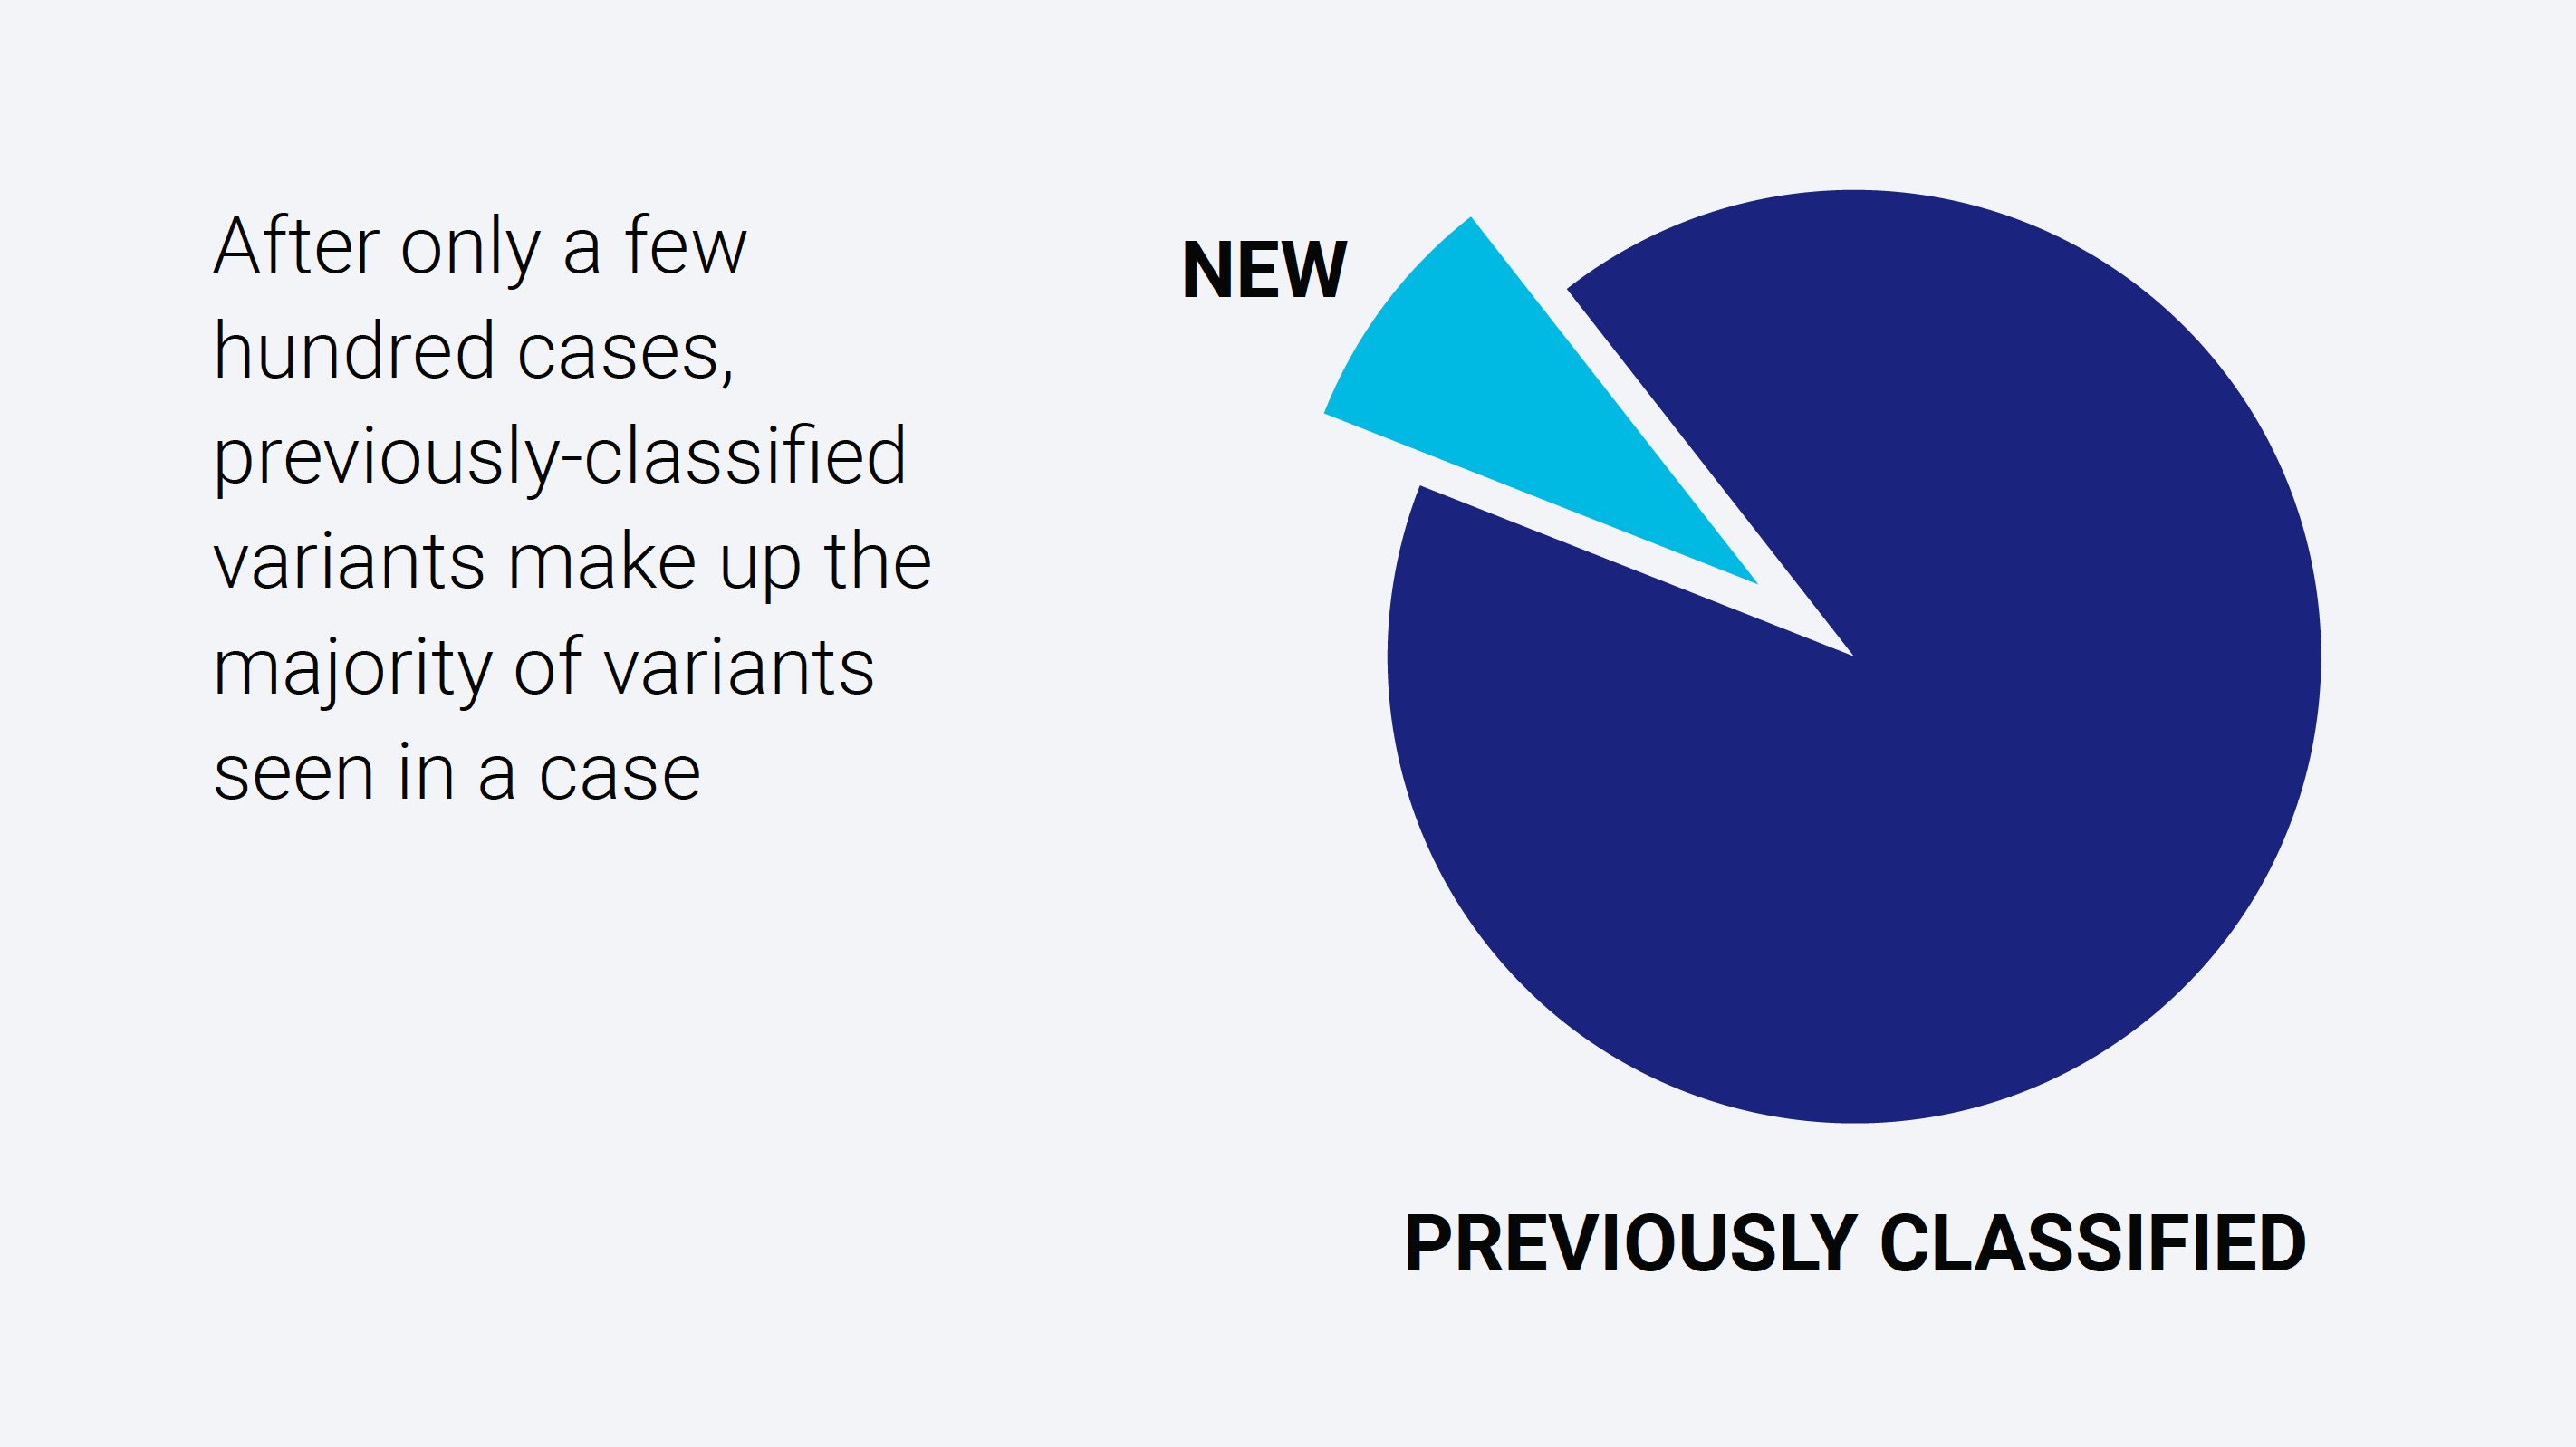 After only a few hundred cases, previously-classified variants make up the majority of variants seen in a case